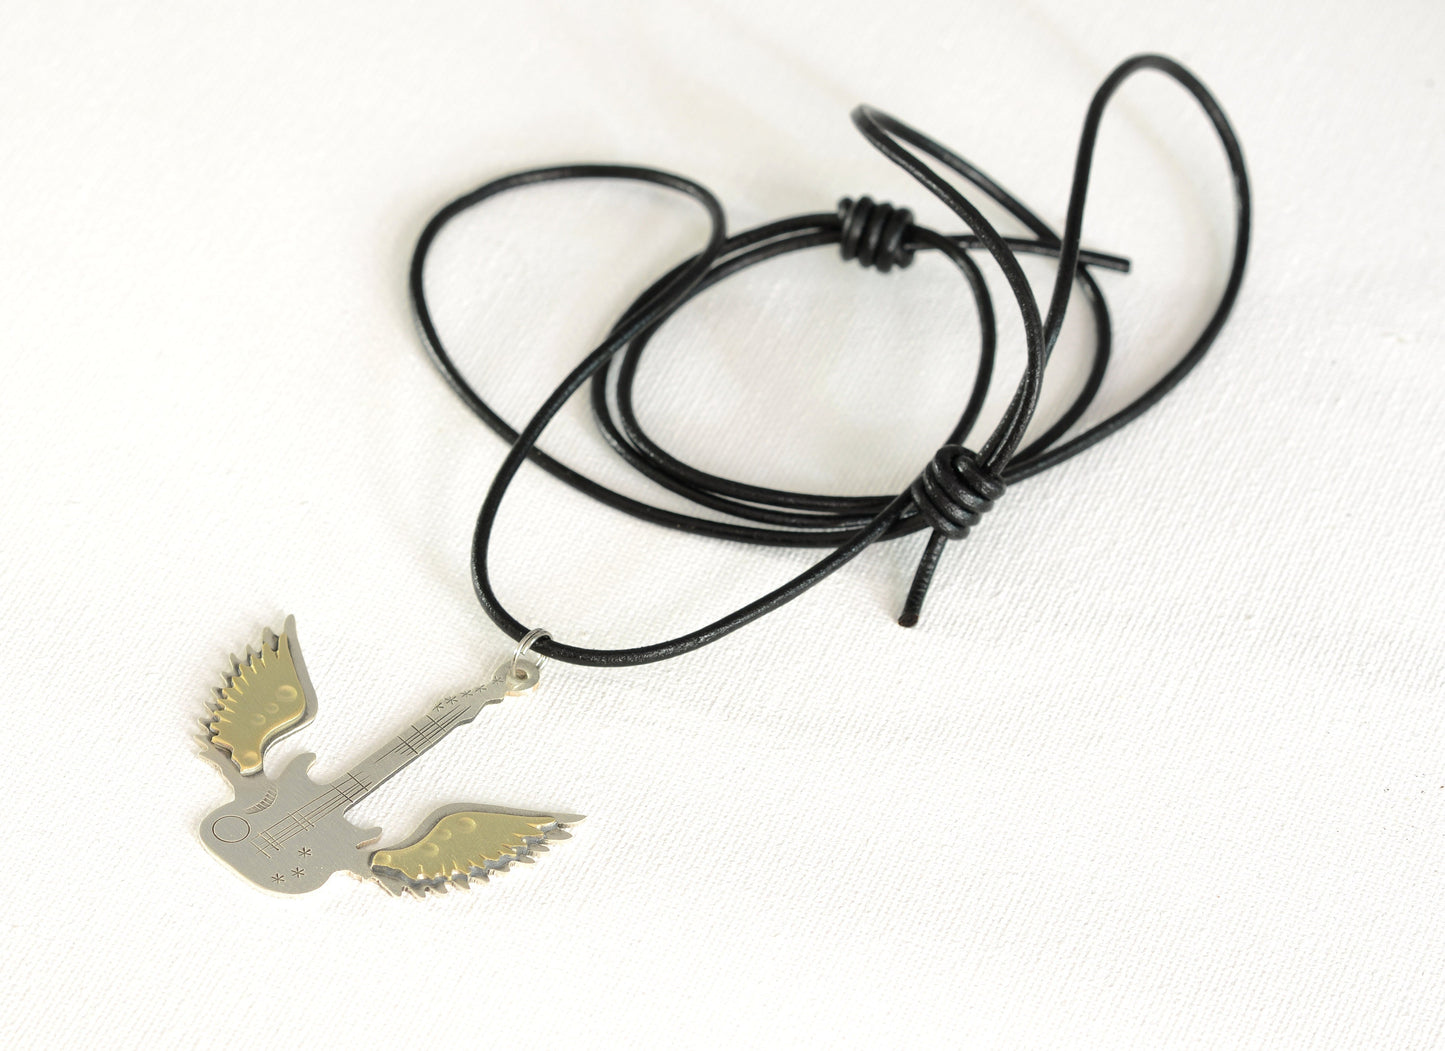 Winged guitar sterling guitar necklace with brass wings